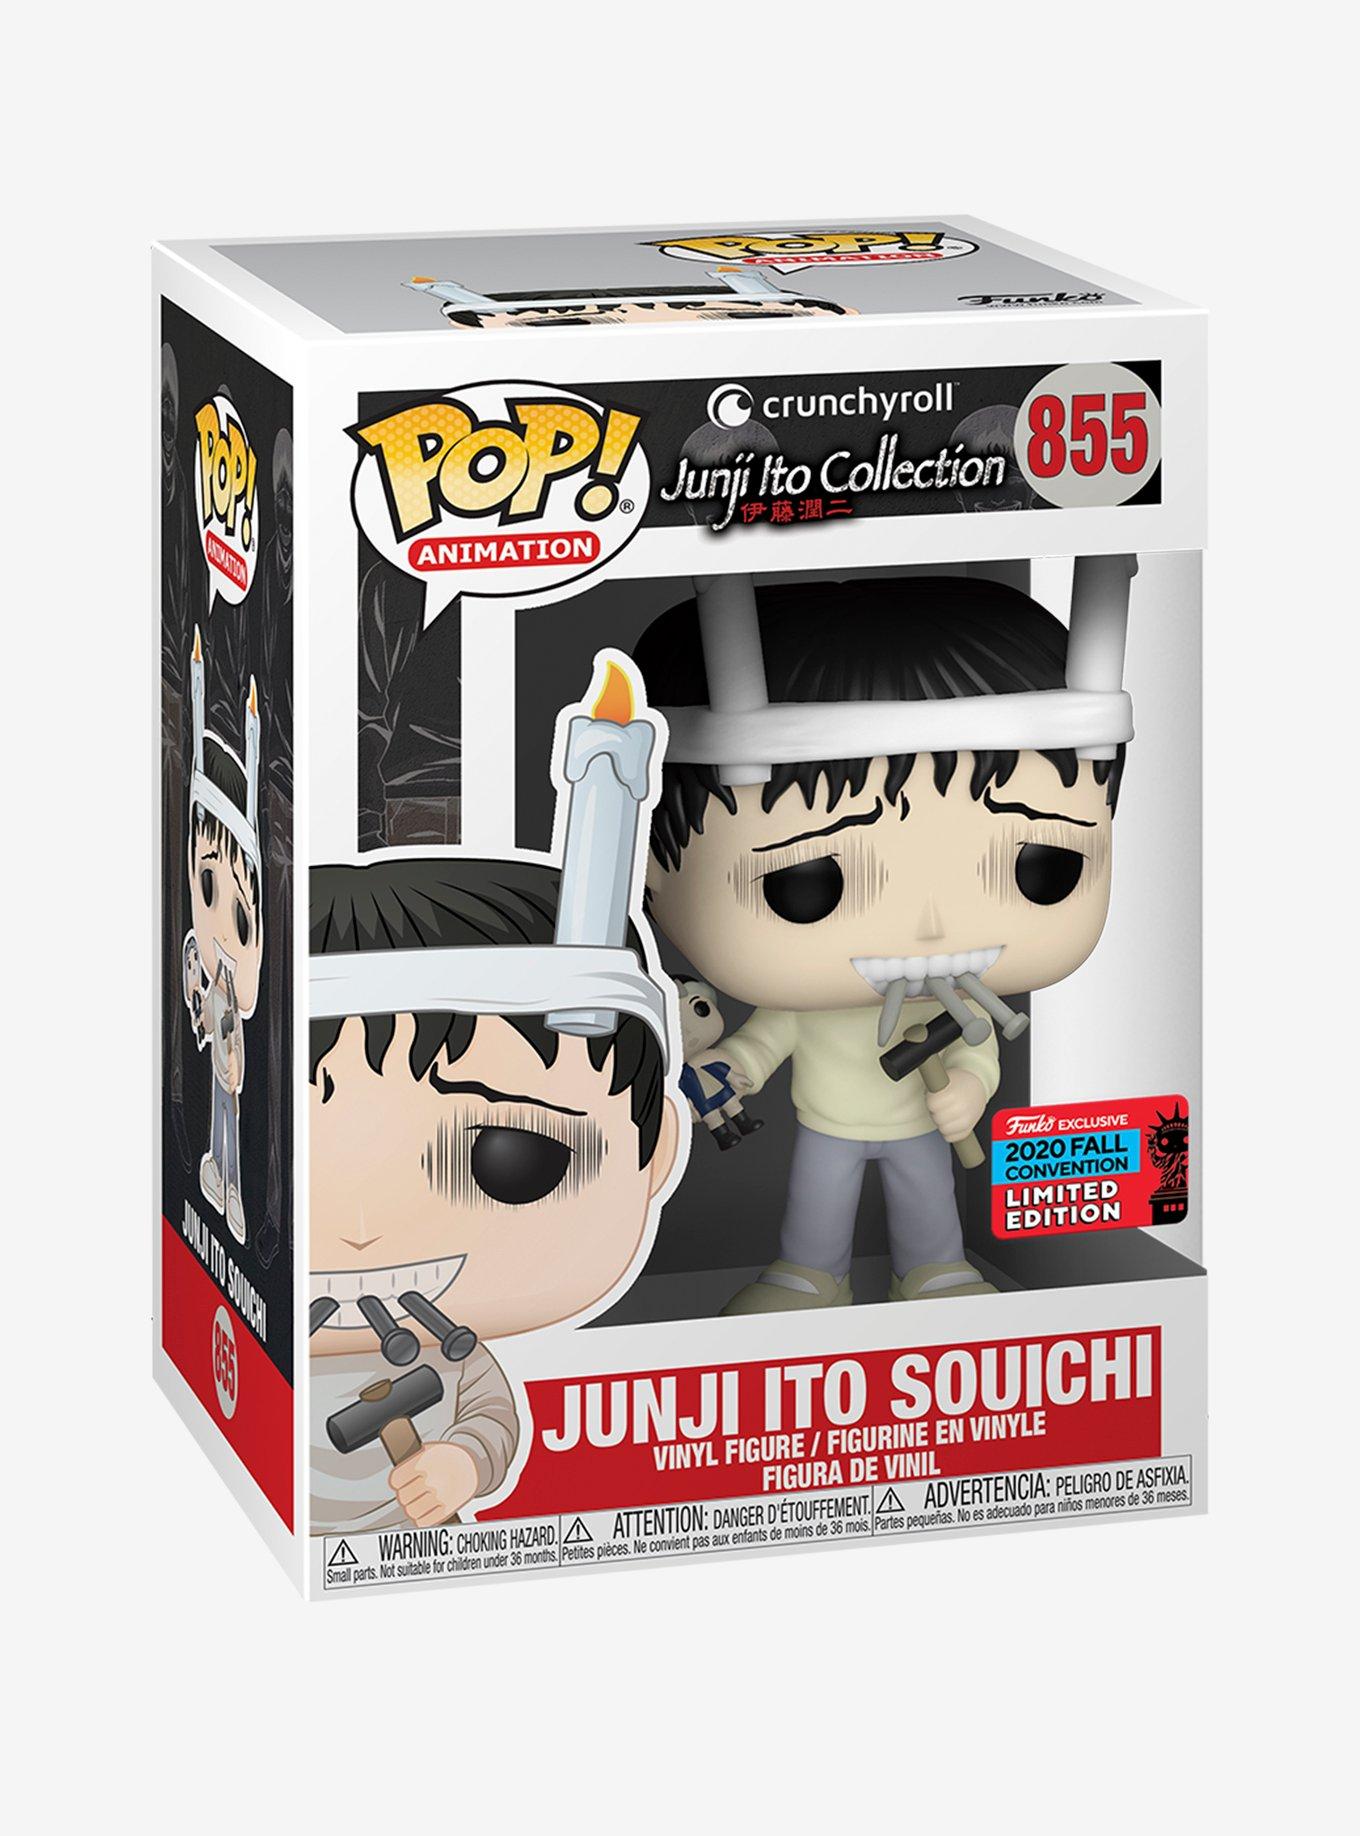  Funko Junji Ito Souichi Tsujii Collectible Toy - The Junji Ito  Collection - Collectible Vinyl Figure - Gift Idea - Official Merchandise -  for Kids & Adults - Anime Fans 